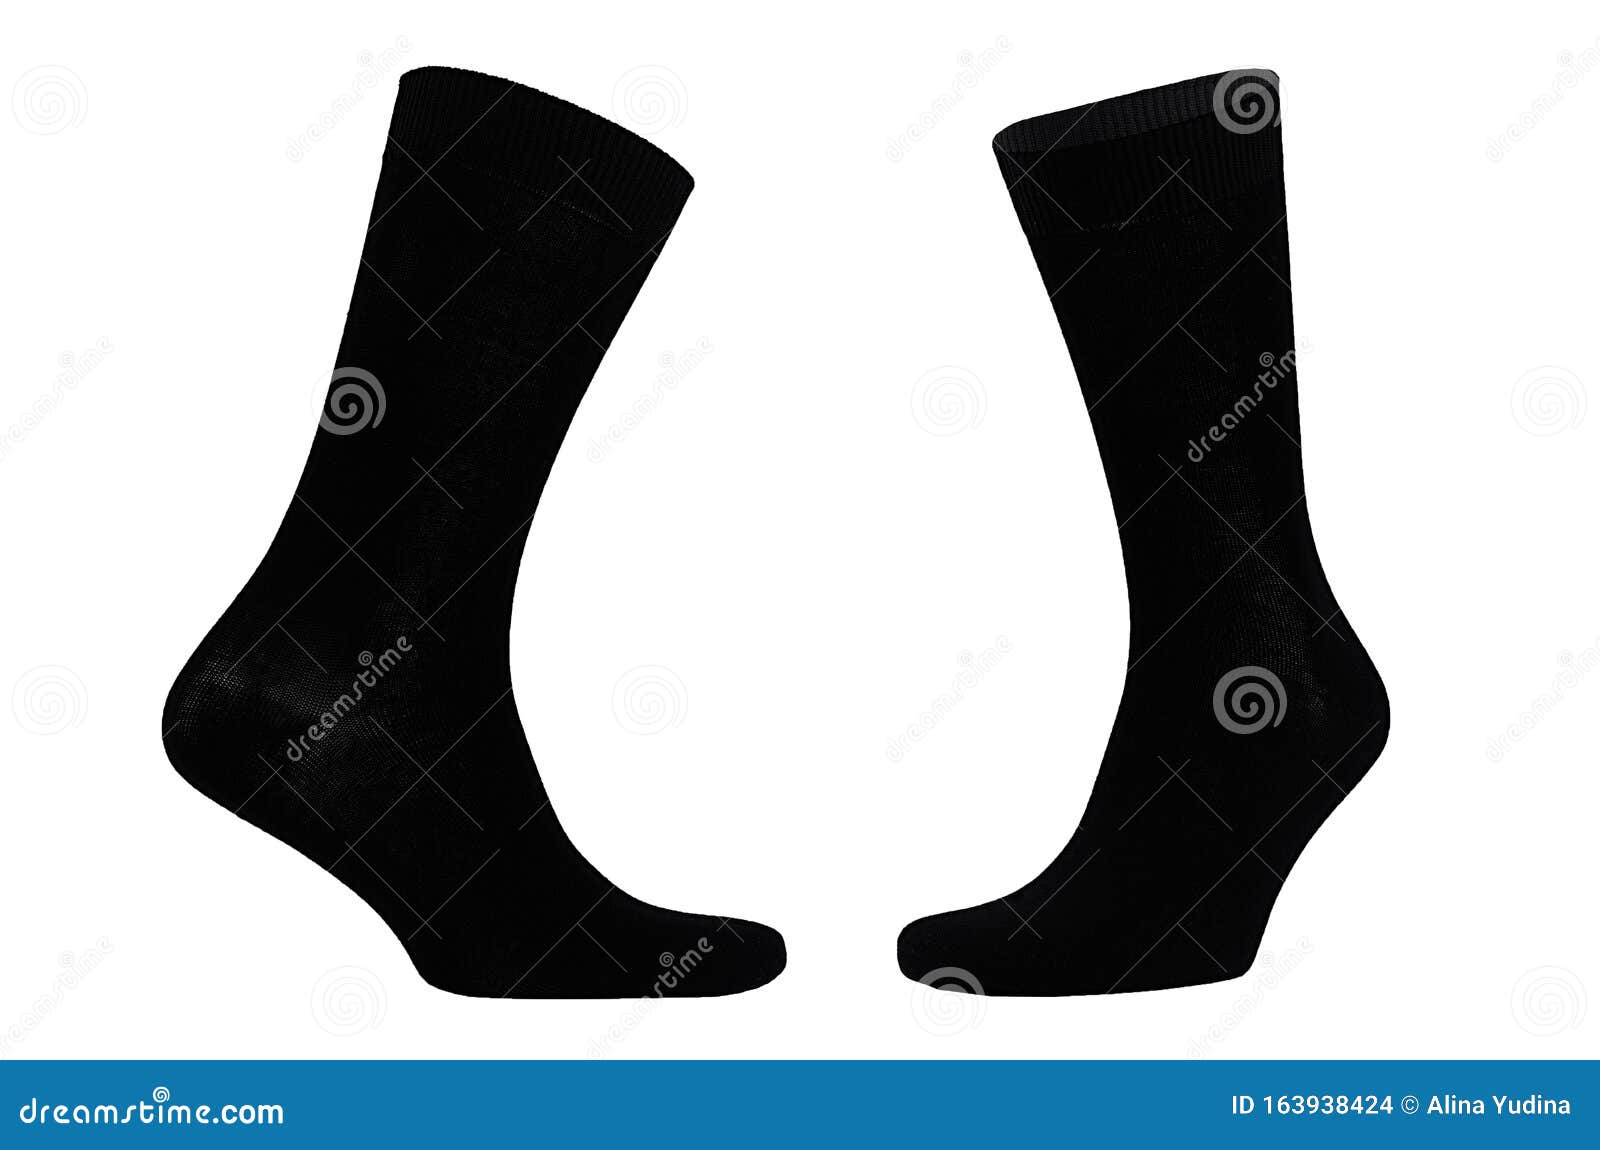 Download Blank Black Cotton Long Socks On Invisible Foot Isolated ...